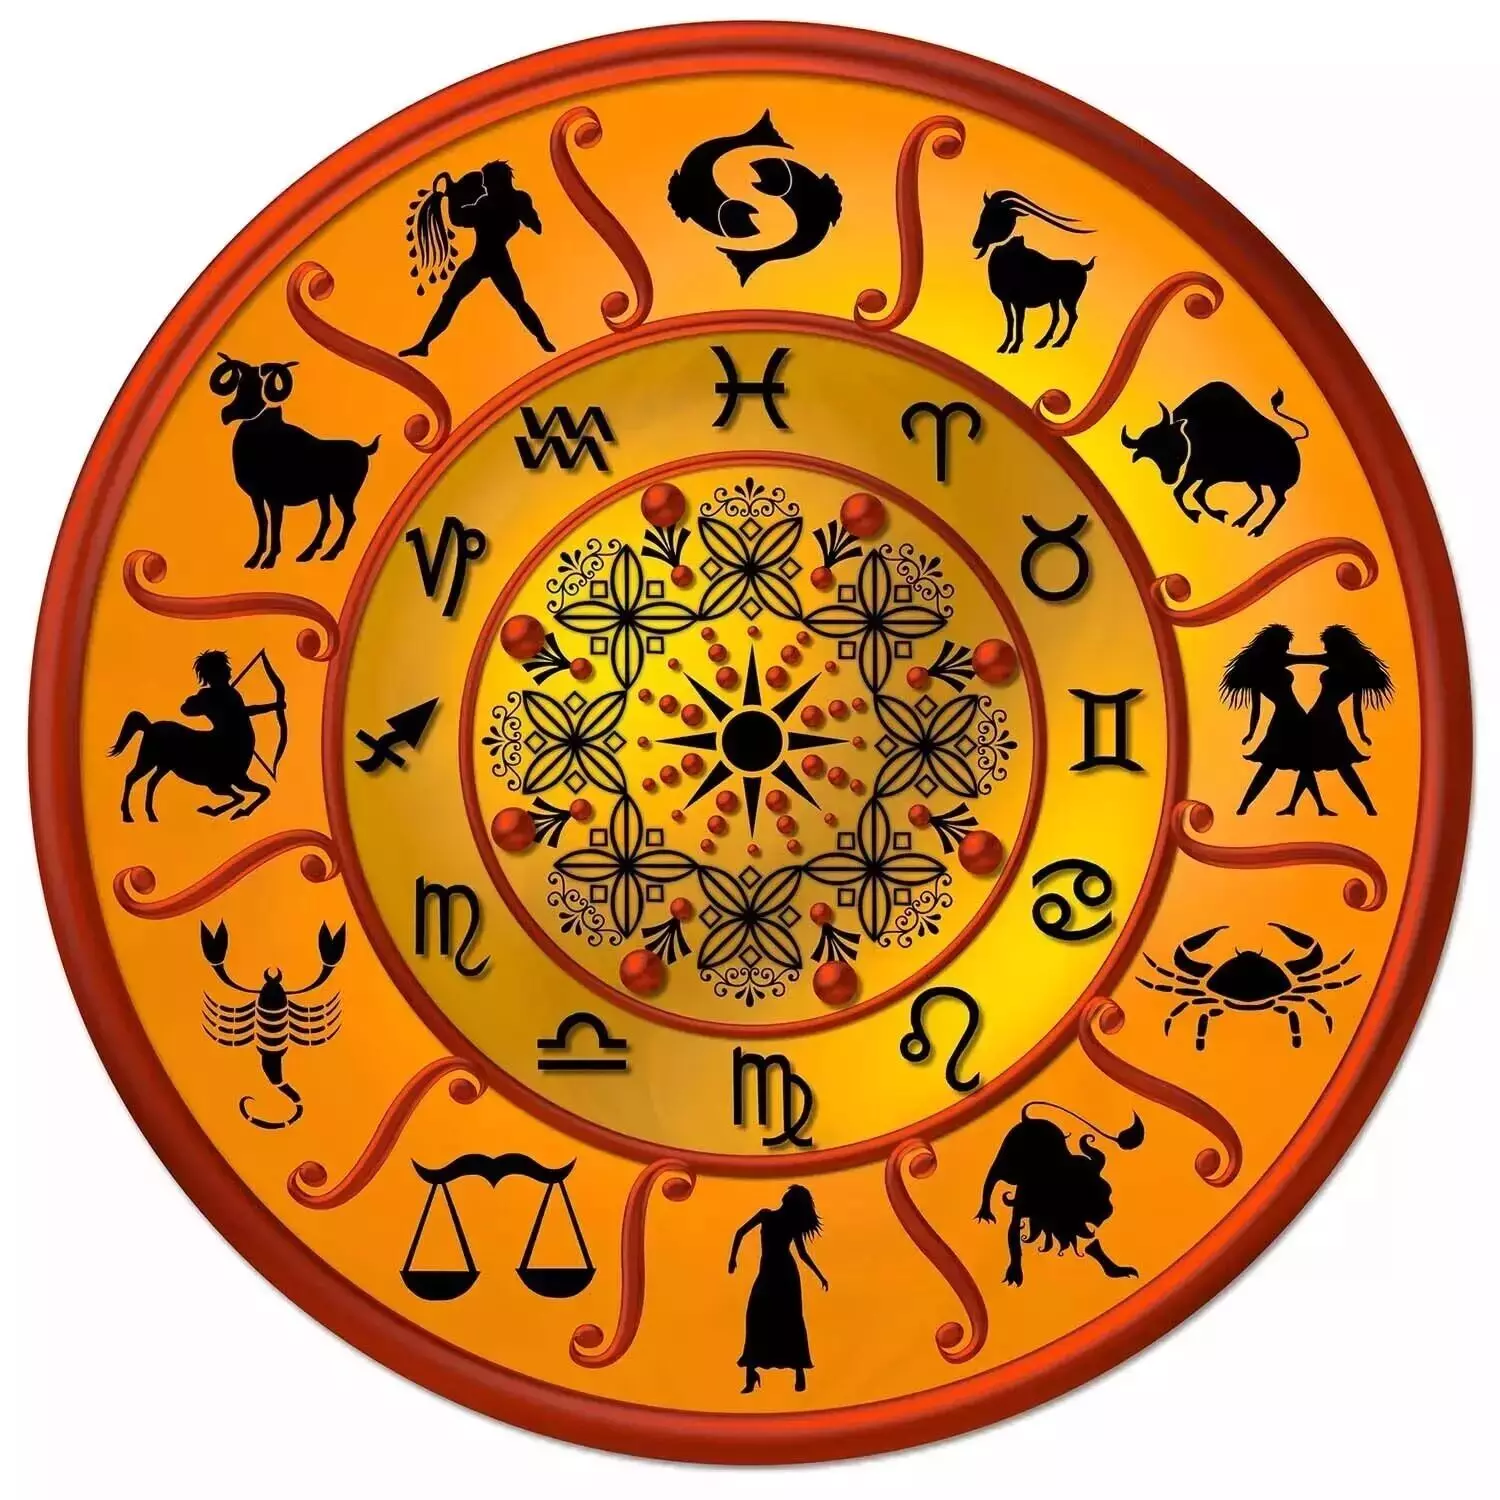 02 October – Know your todays horoscope